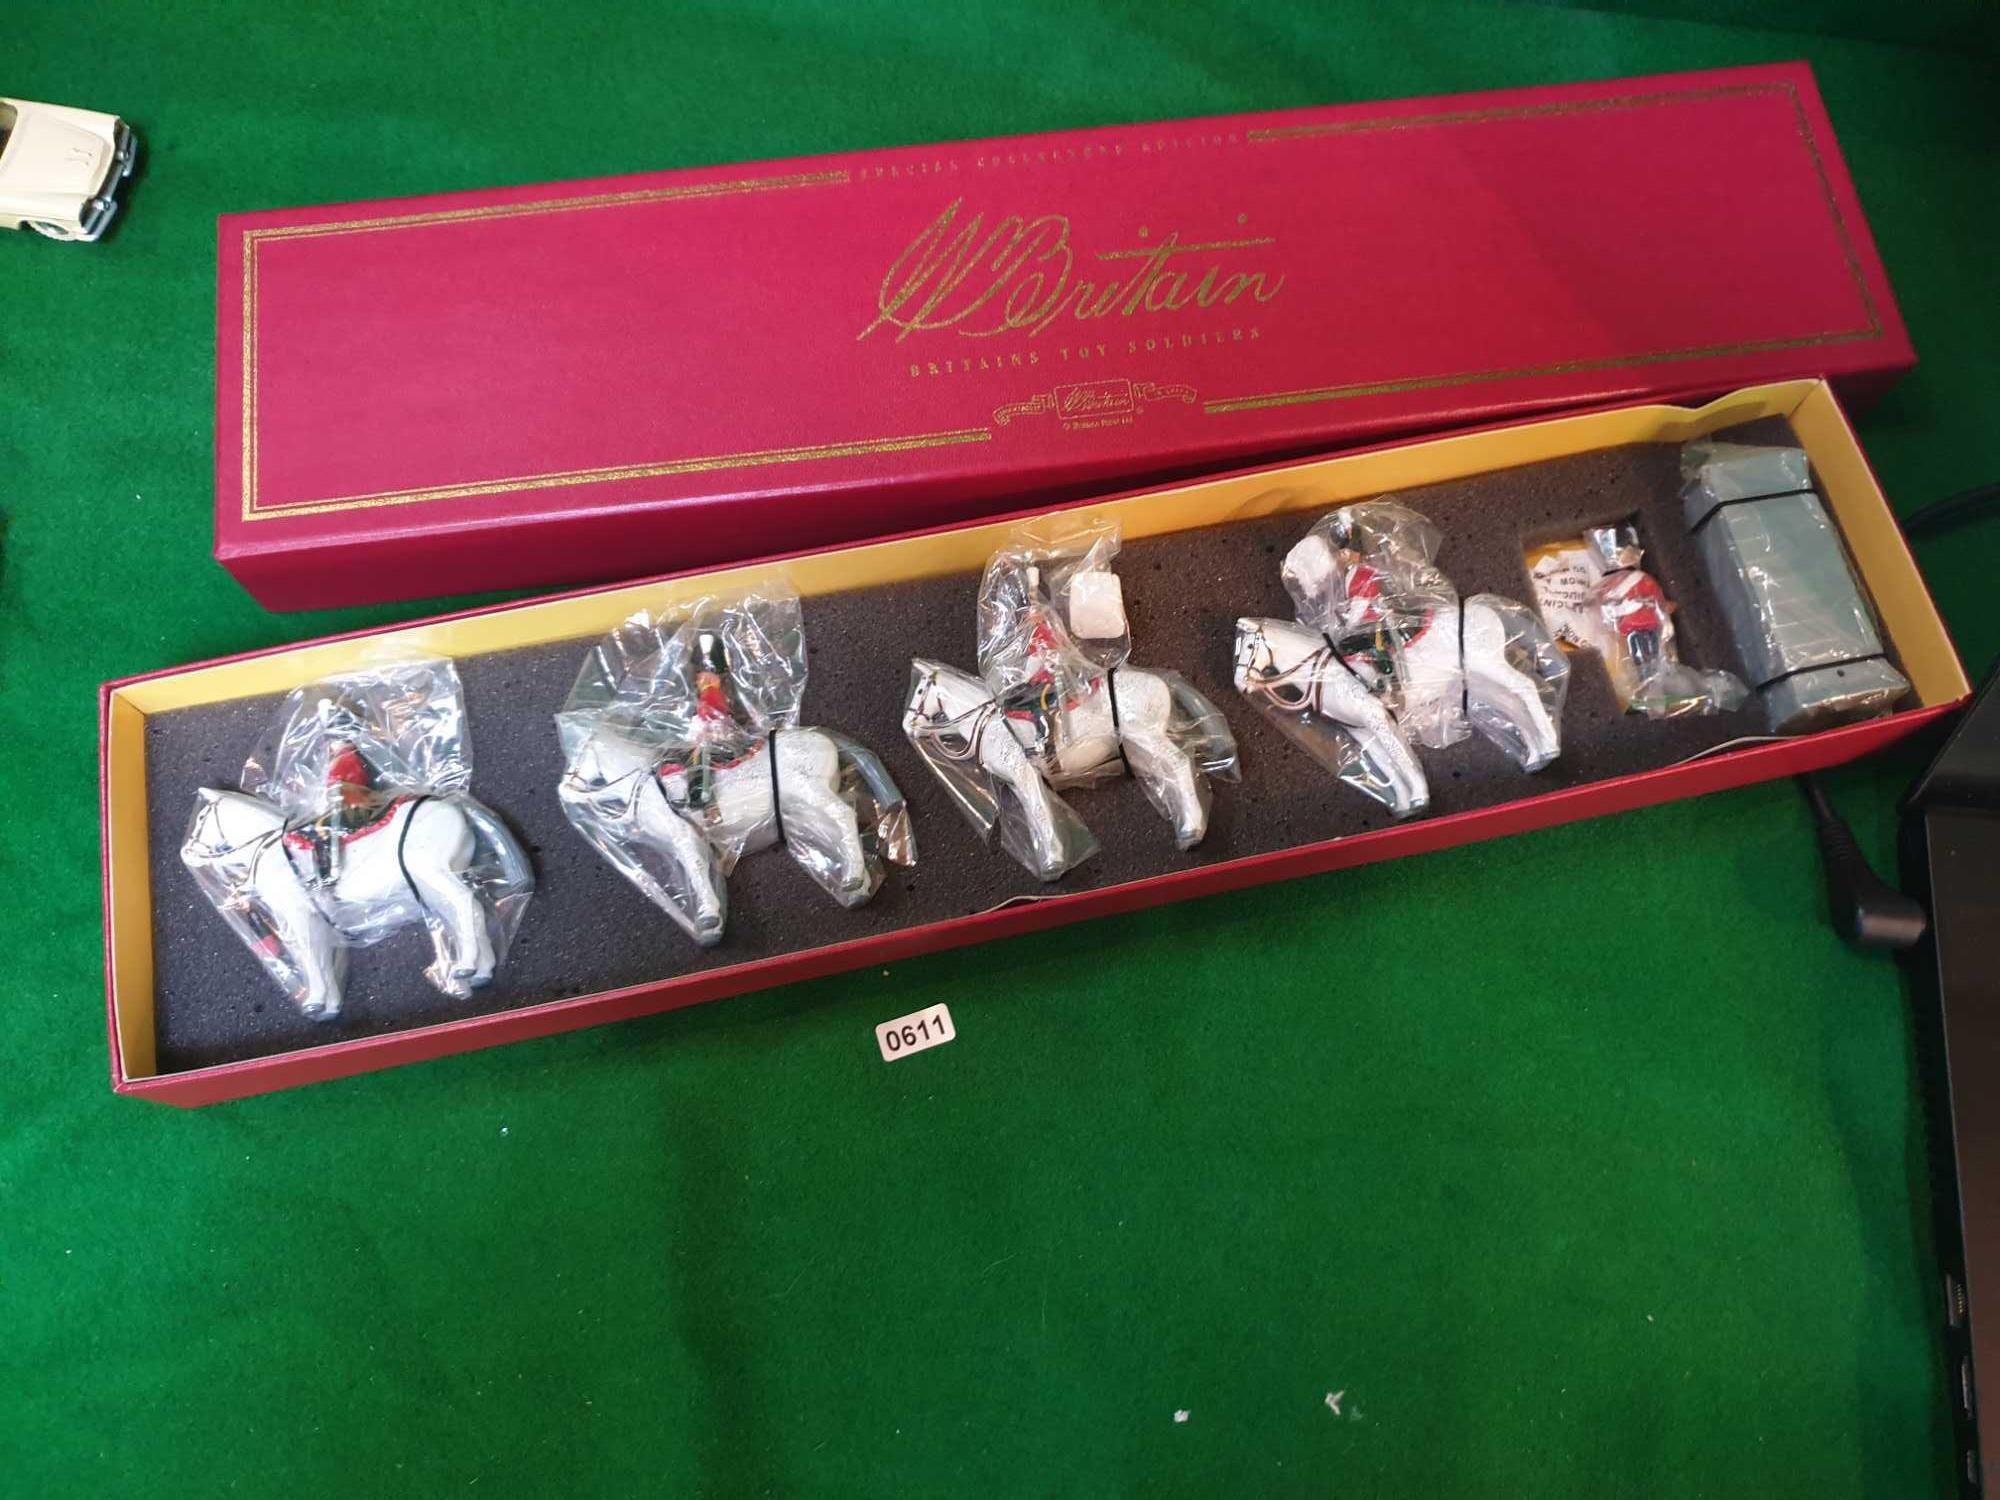 Britains 00075 British Royal Scots Greys Mounted Metal Toy Soldier Figure Set Mint Sealed In Box The